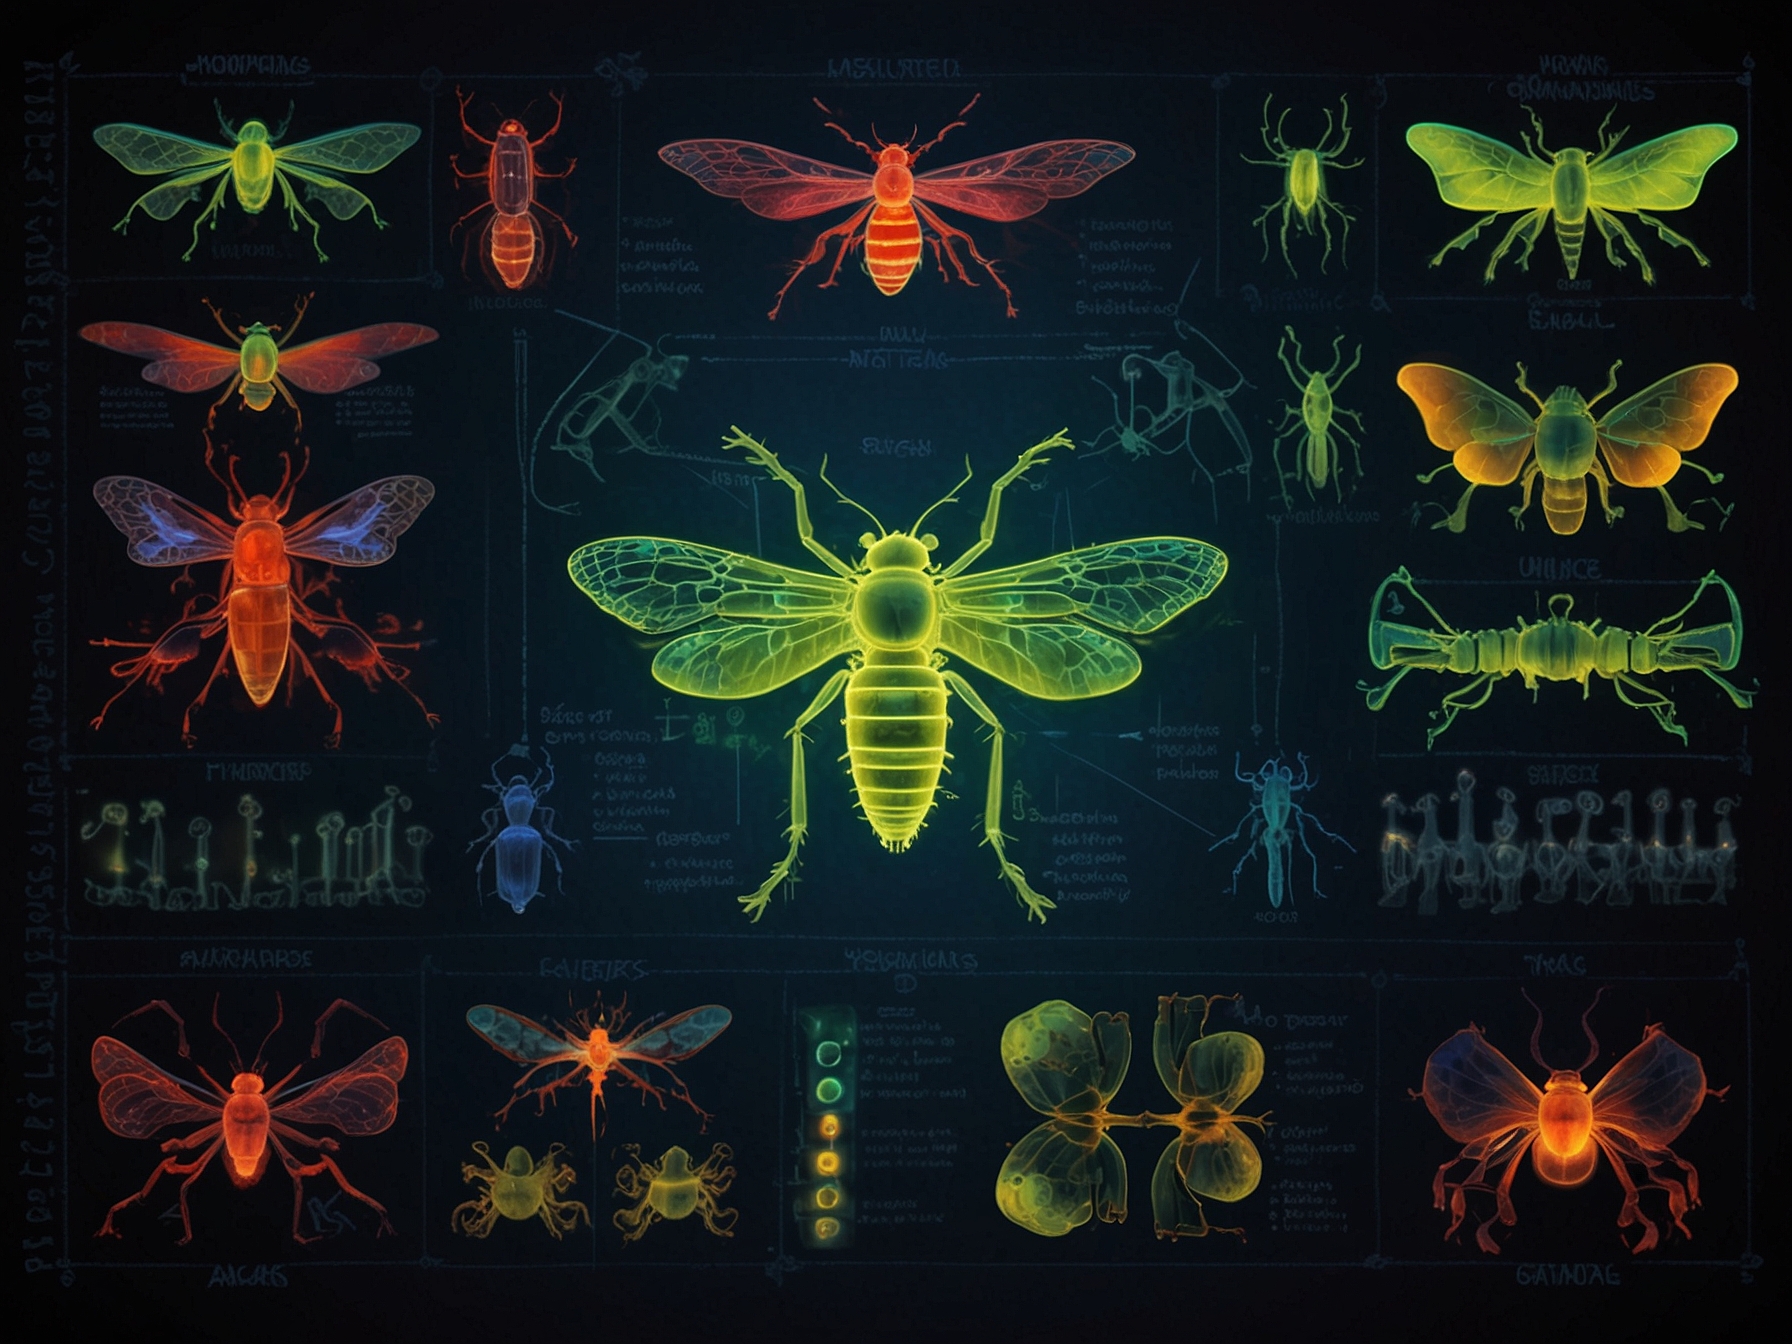 An infographic displaying various insect orders infected with Symbiodolus clandestinus, visualized using fluorescent probes to highlight bacterial presence in insect cells.